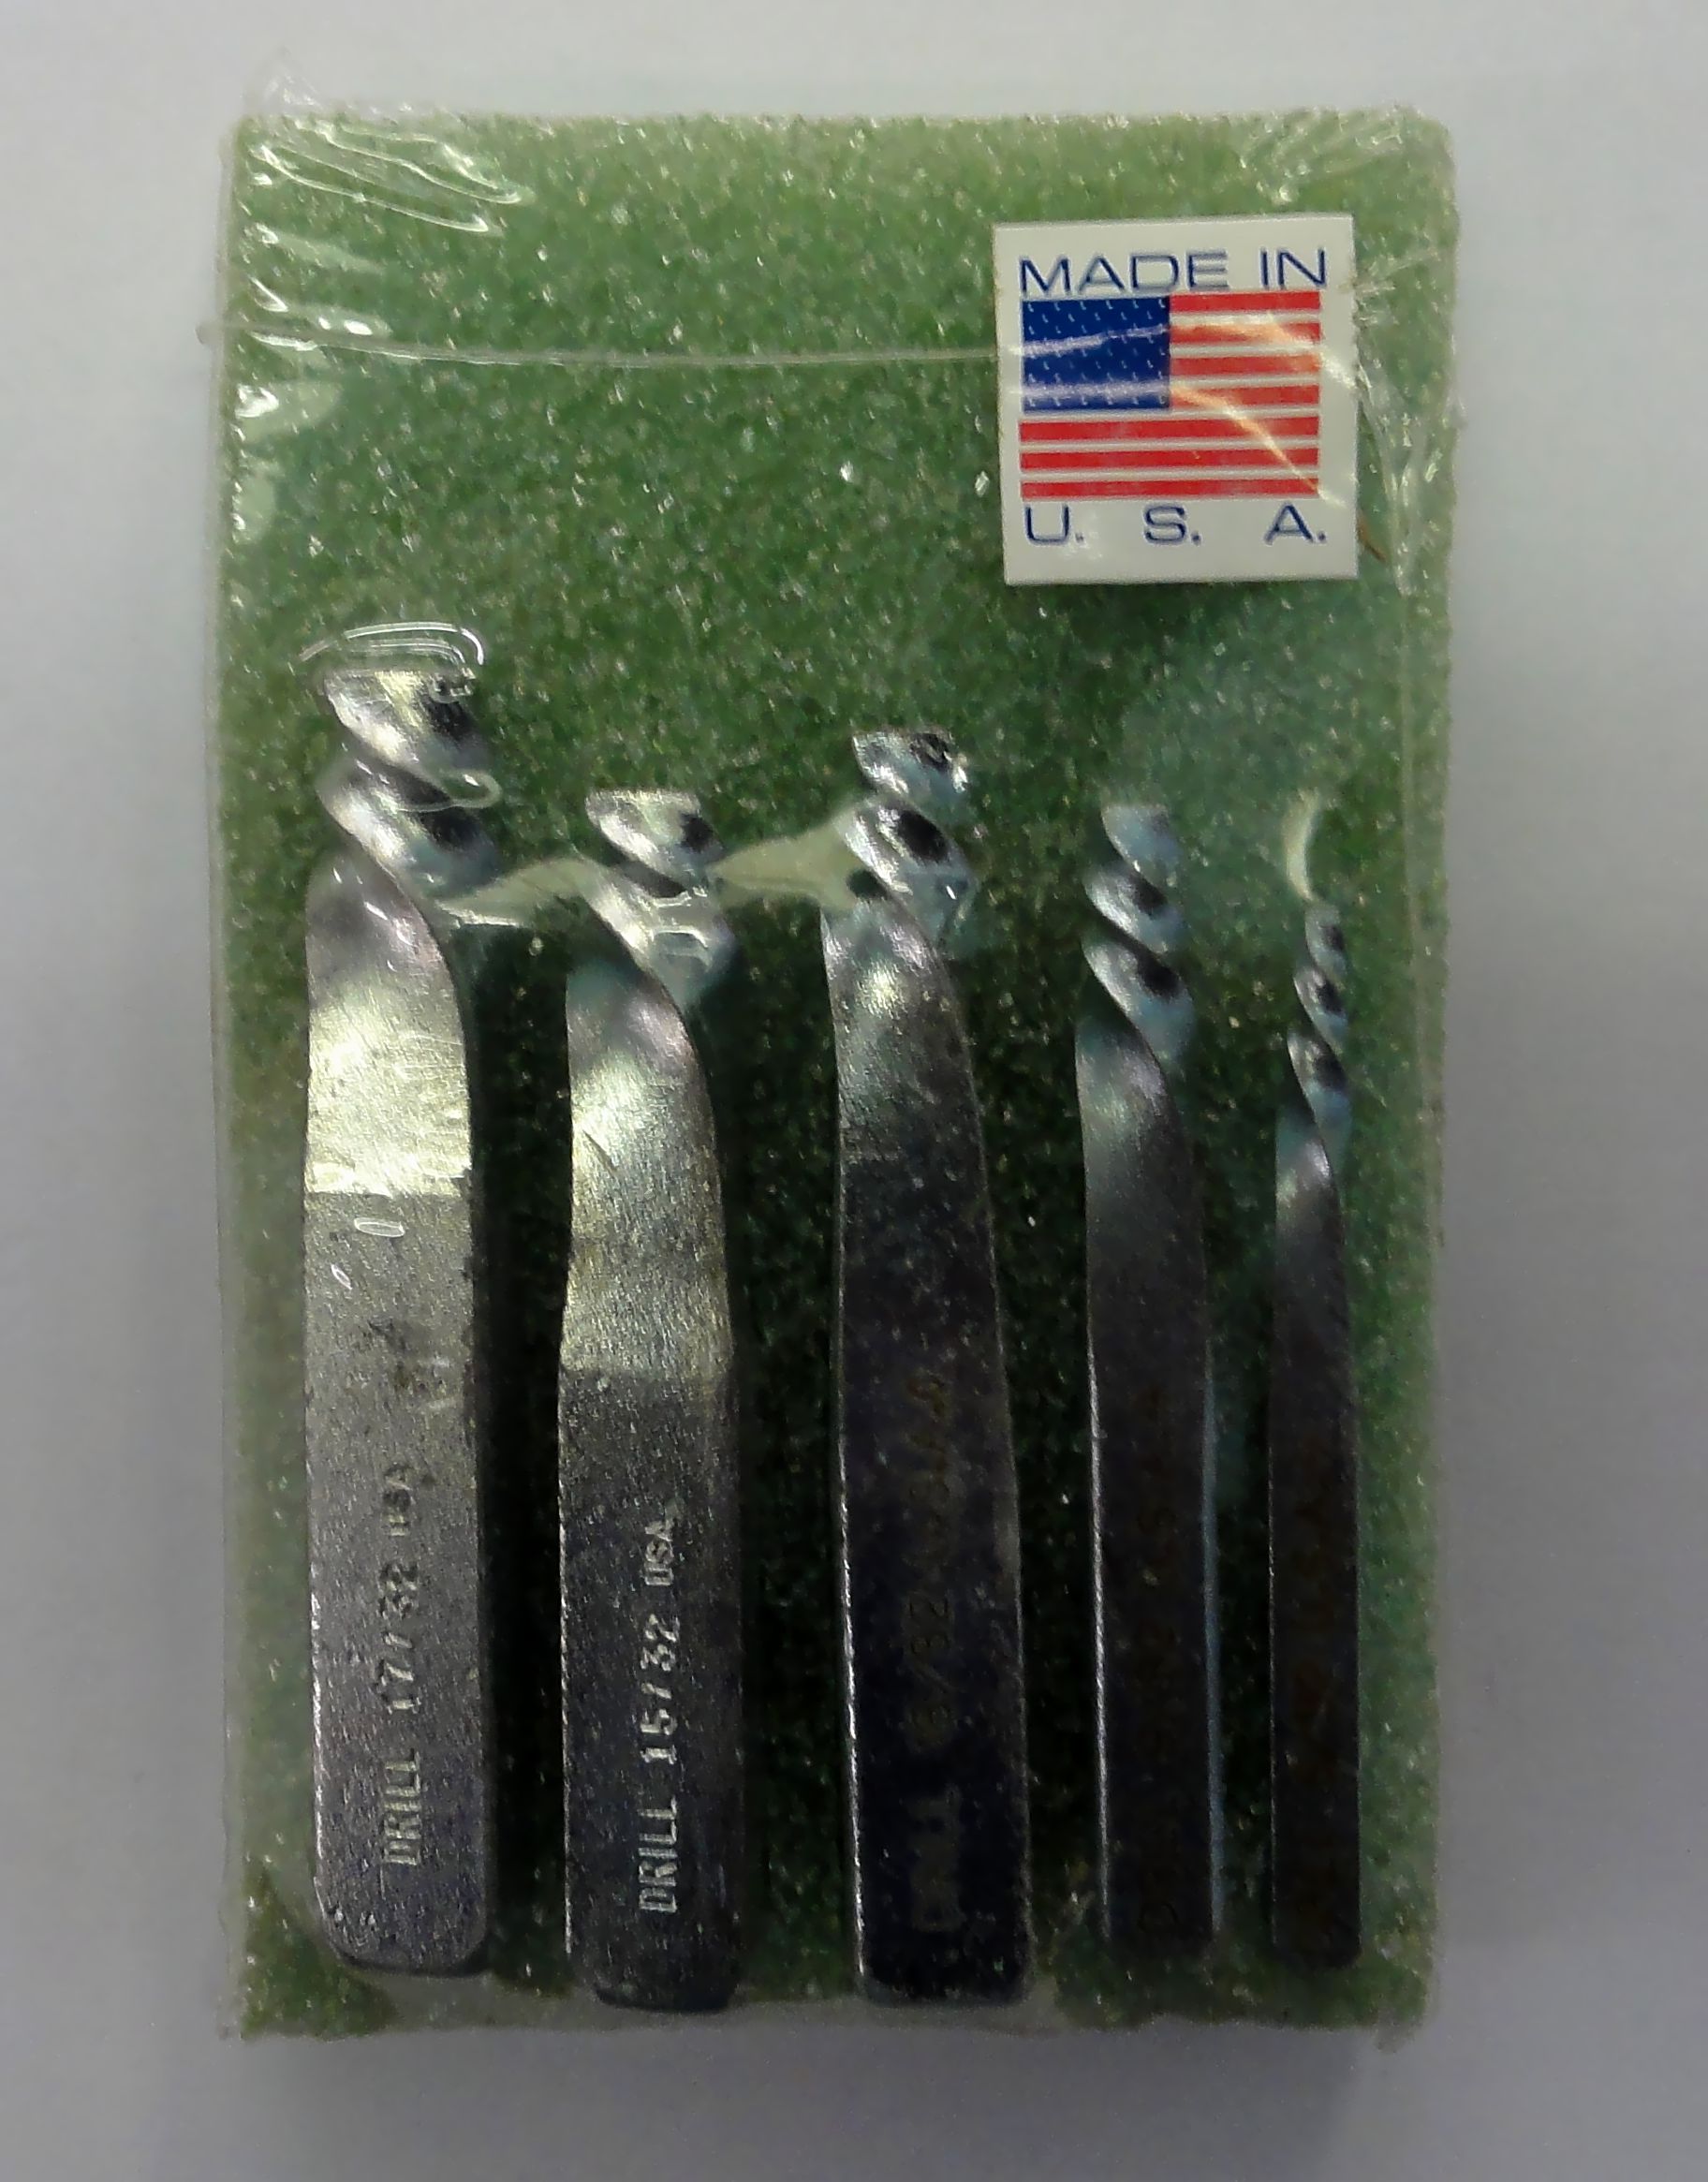 EXT-1399 5 pc Twist Style Extractor Set 5/32" to 17/32" Made in U.S.A.